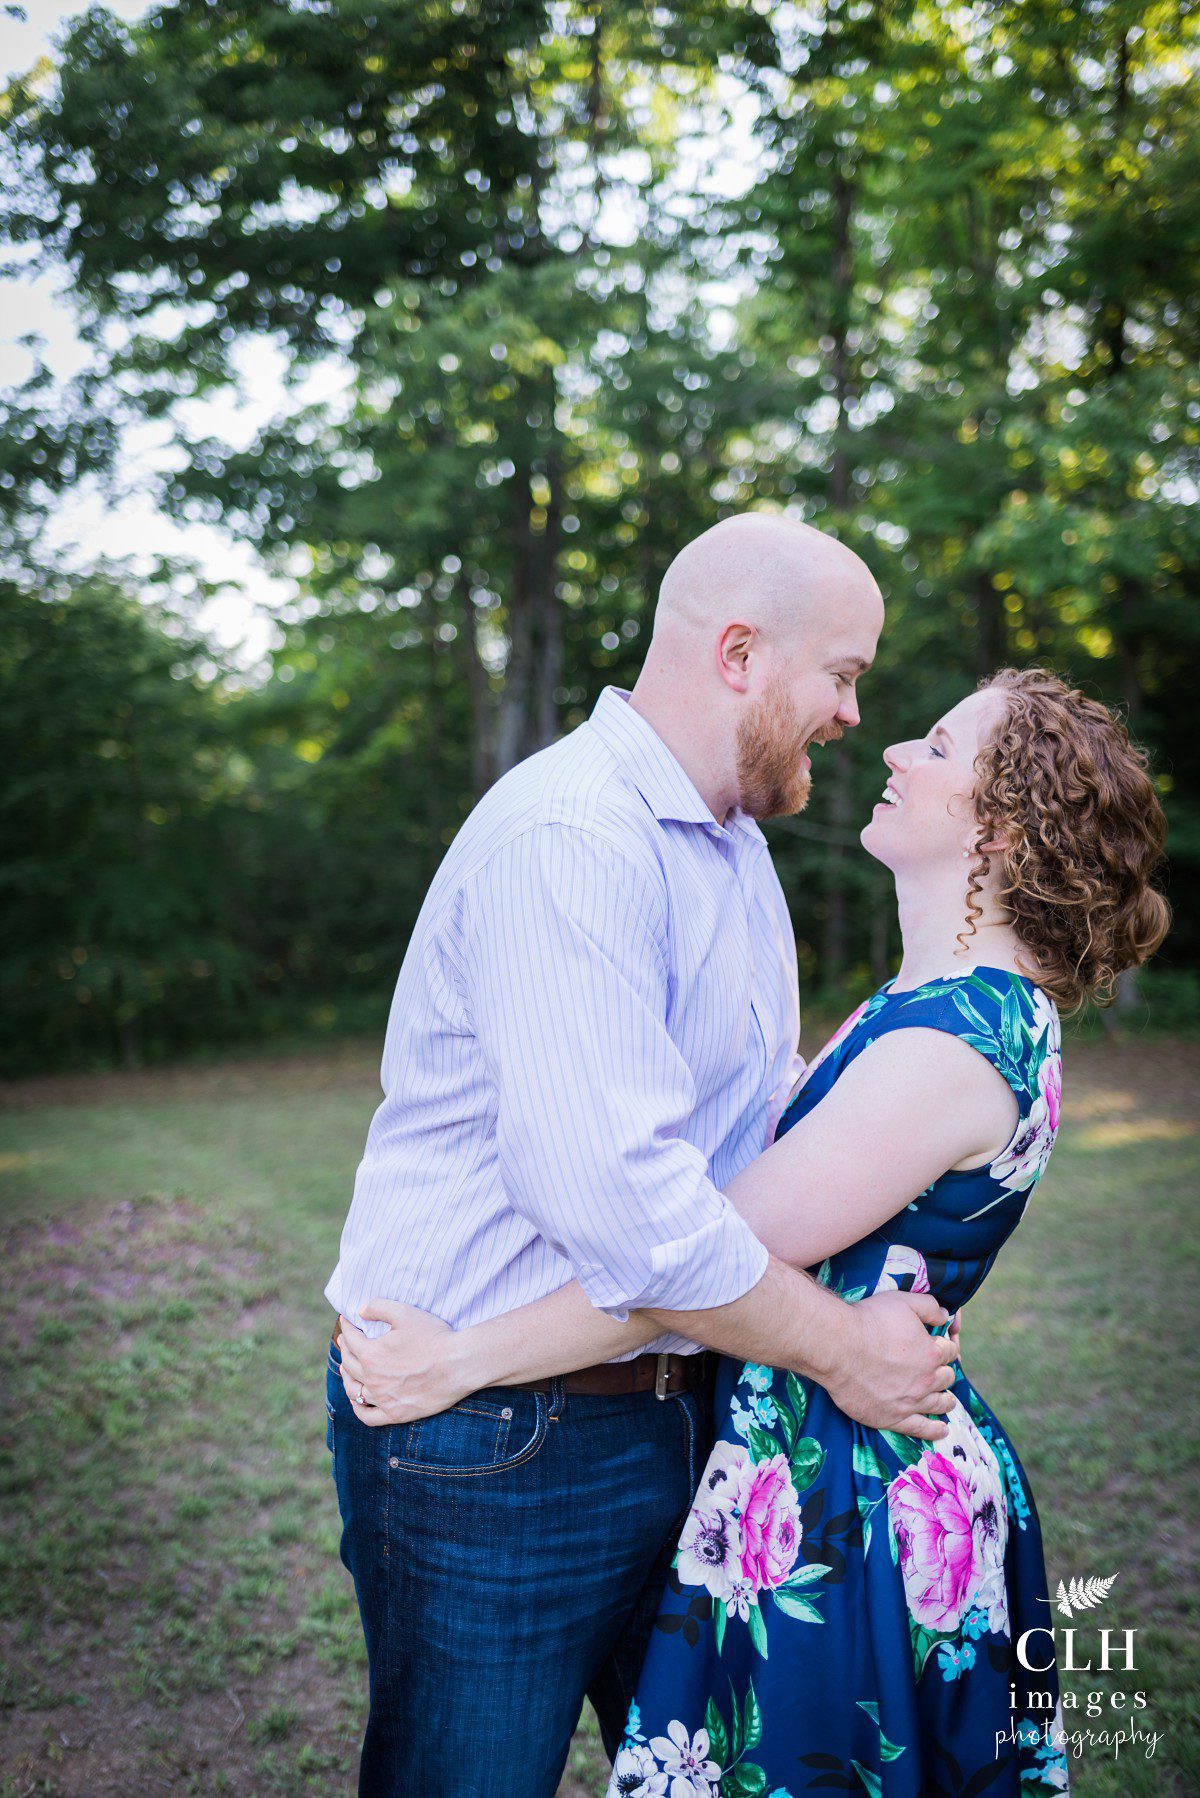 CLH images Photography - Country Engagement Session - Delanson New York - Engagement Photographer - Ashley and Peter (22)